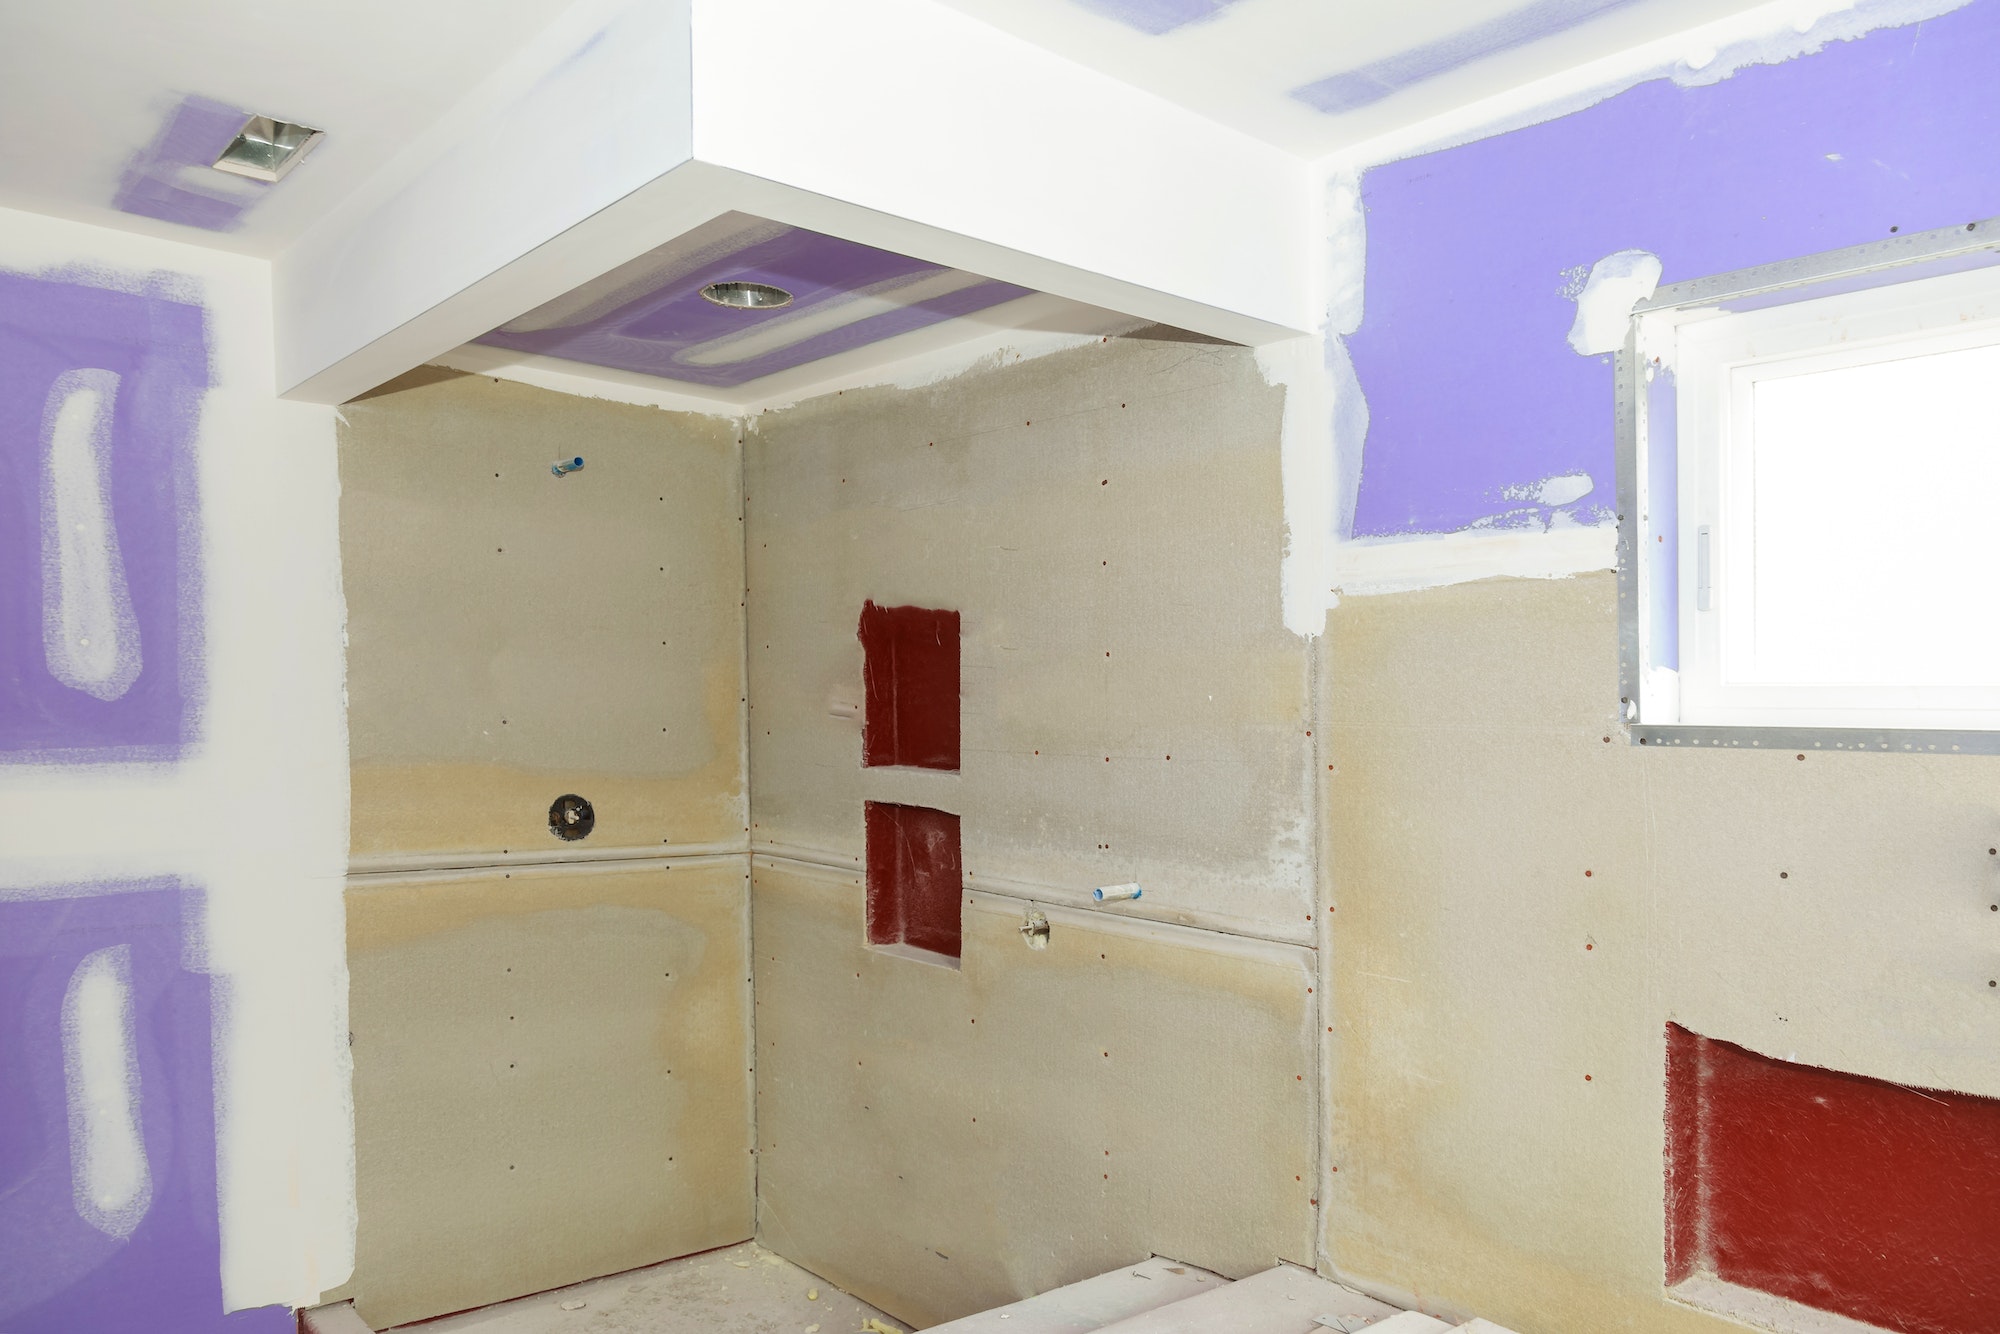 Bathroom remodeling progresses as drywall is smoothed